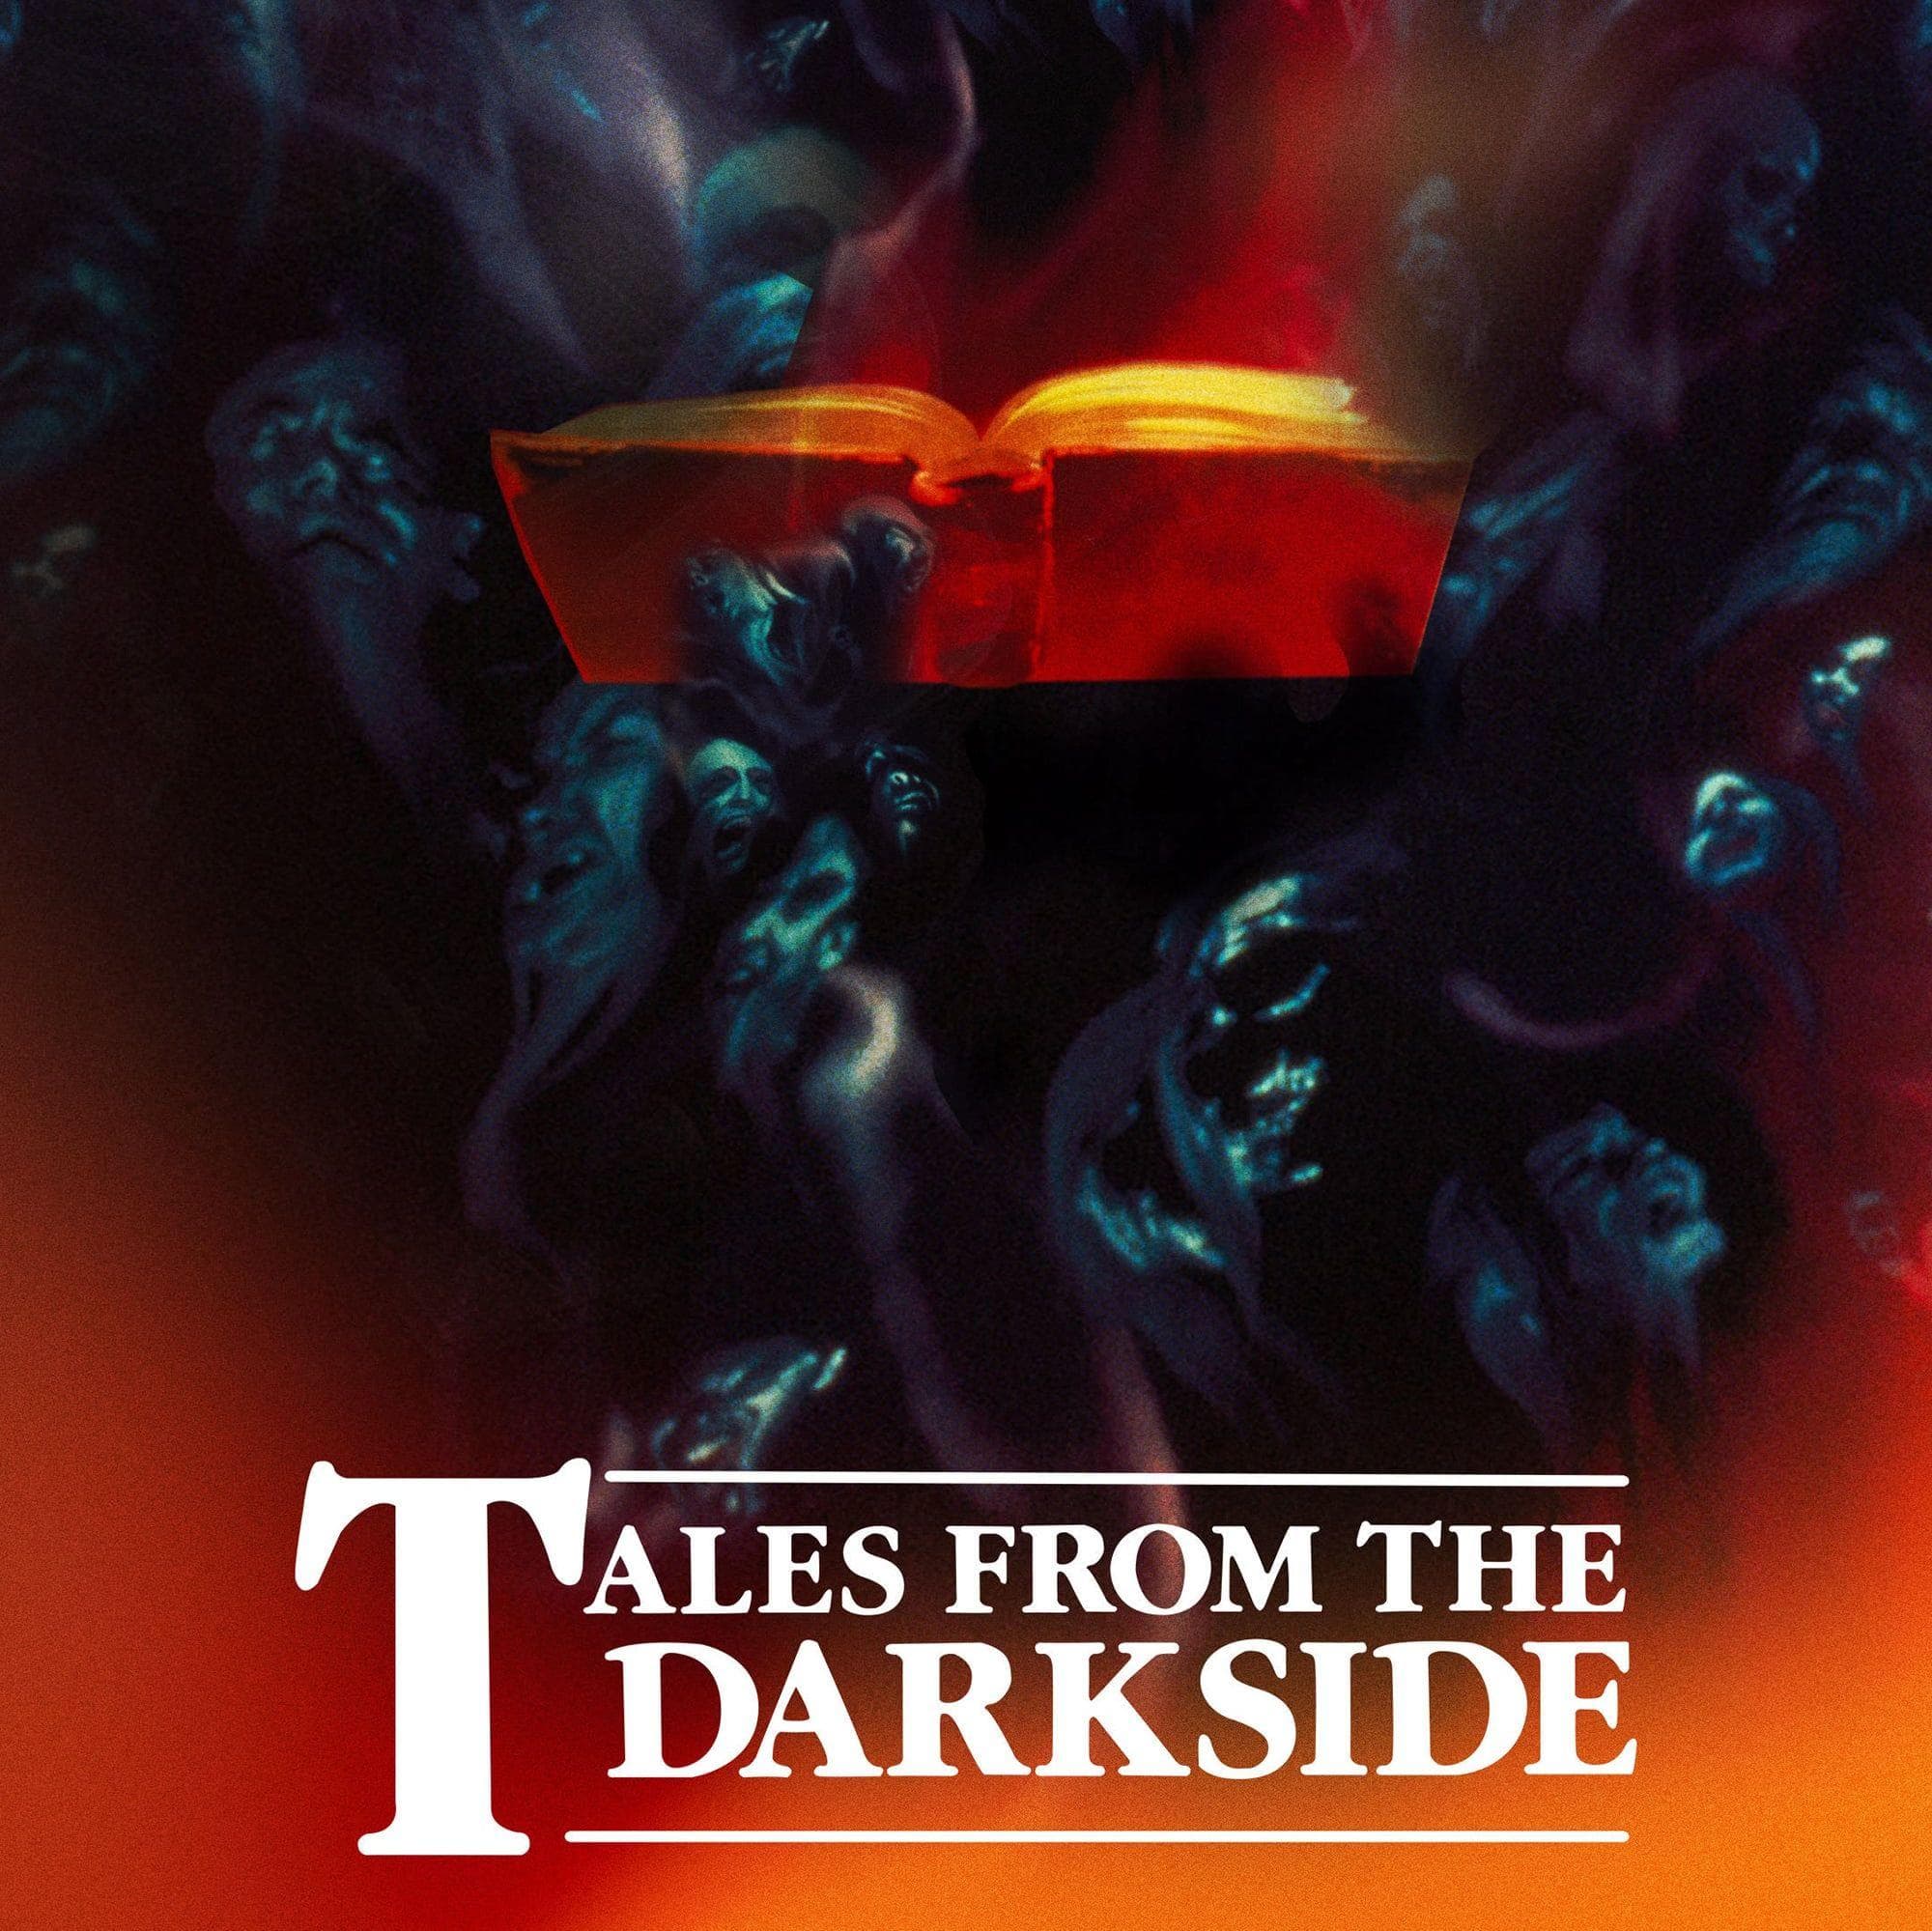 download free the dark pictures anthology series